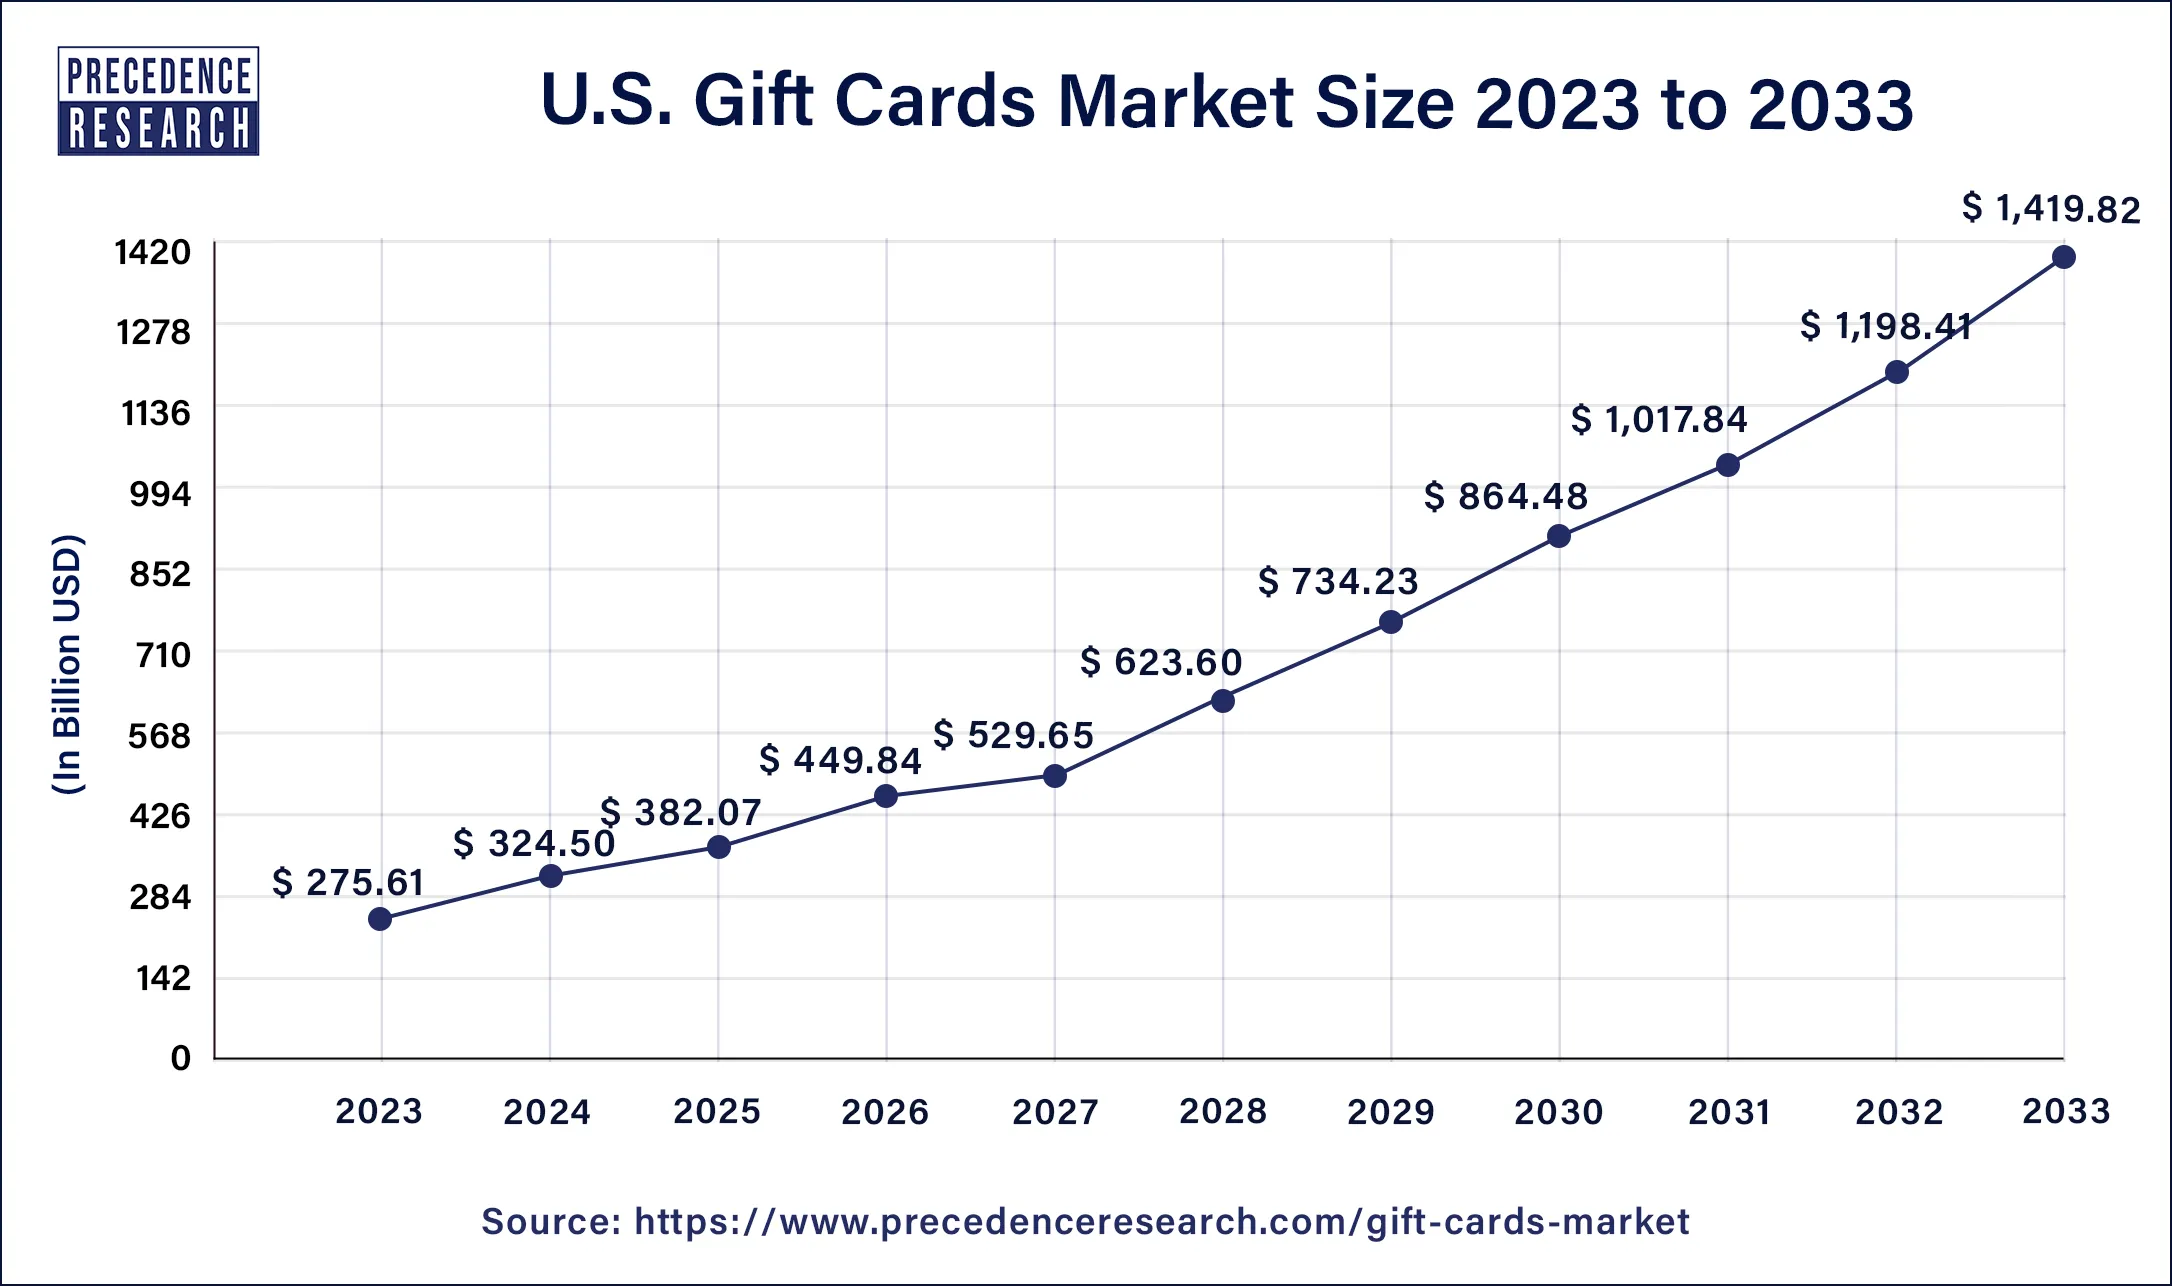 U.S. Gift Cards Market Size 2024 to 2033